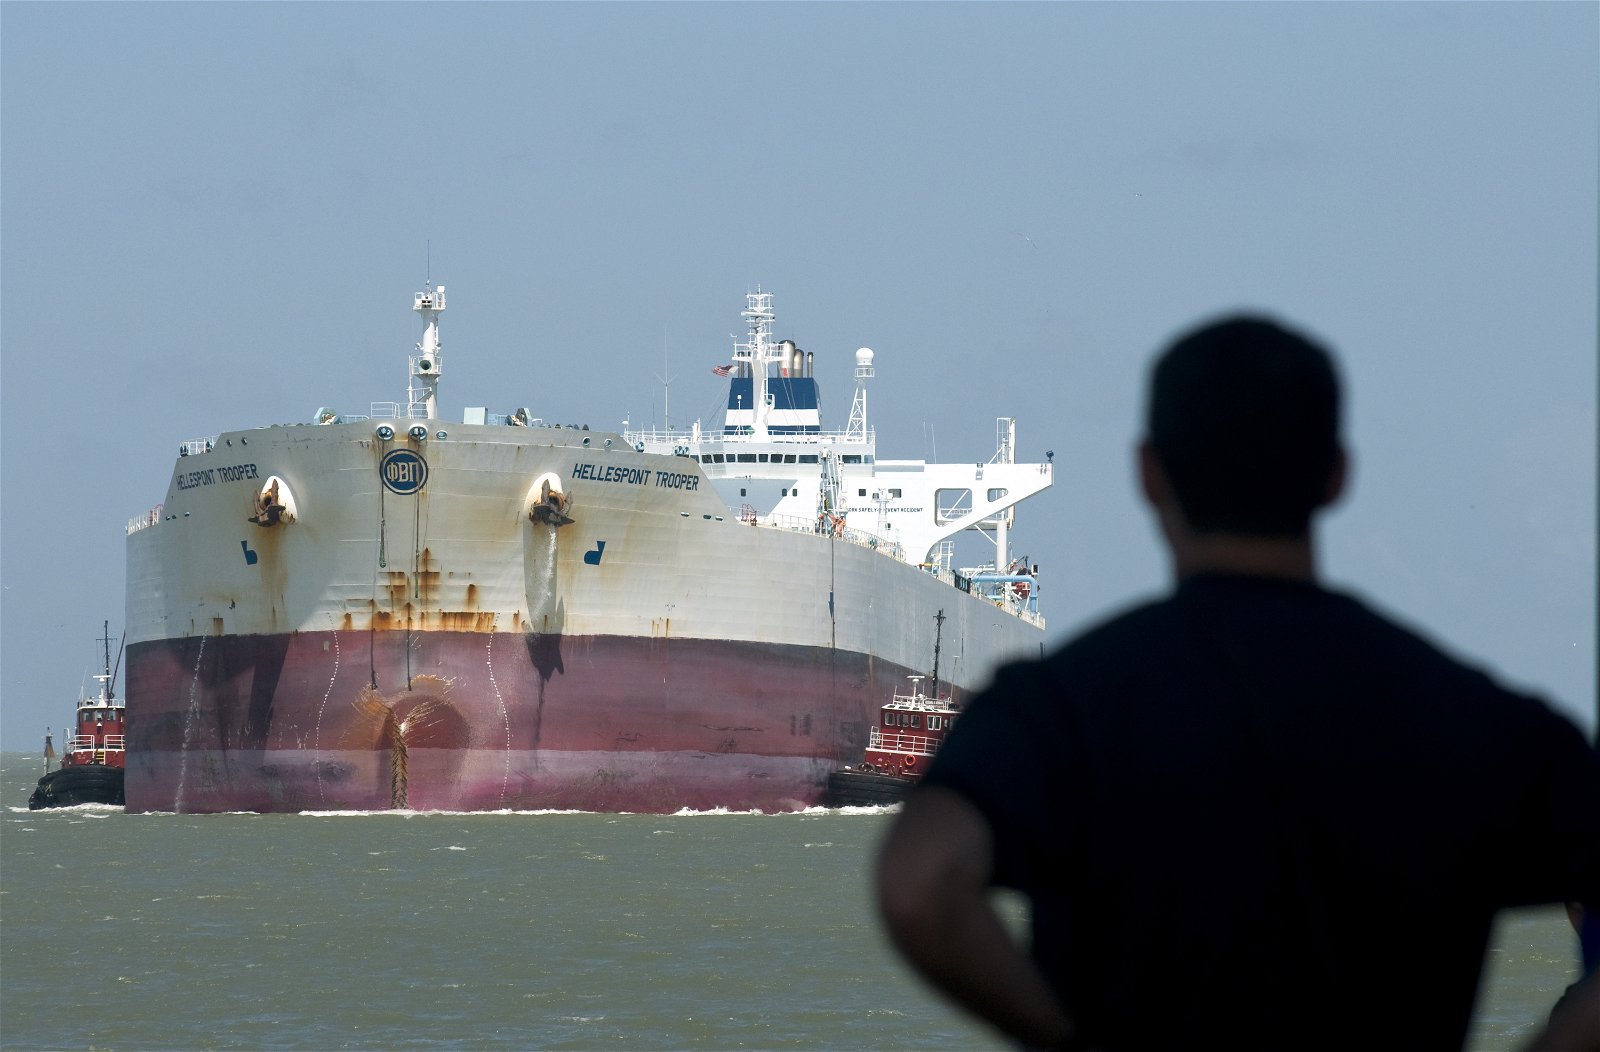 America will be the top crude oil exporter next year